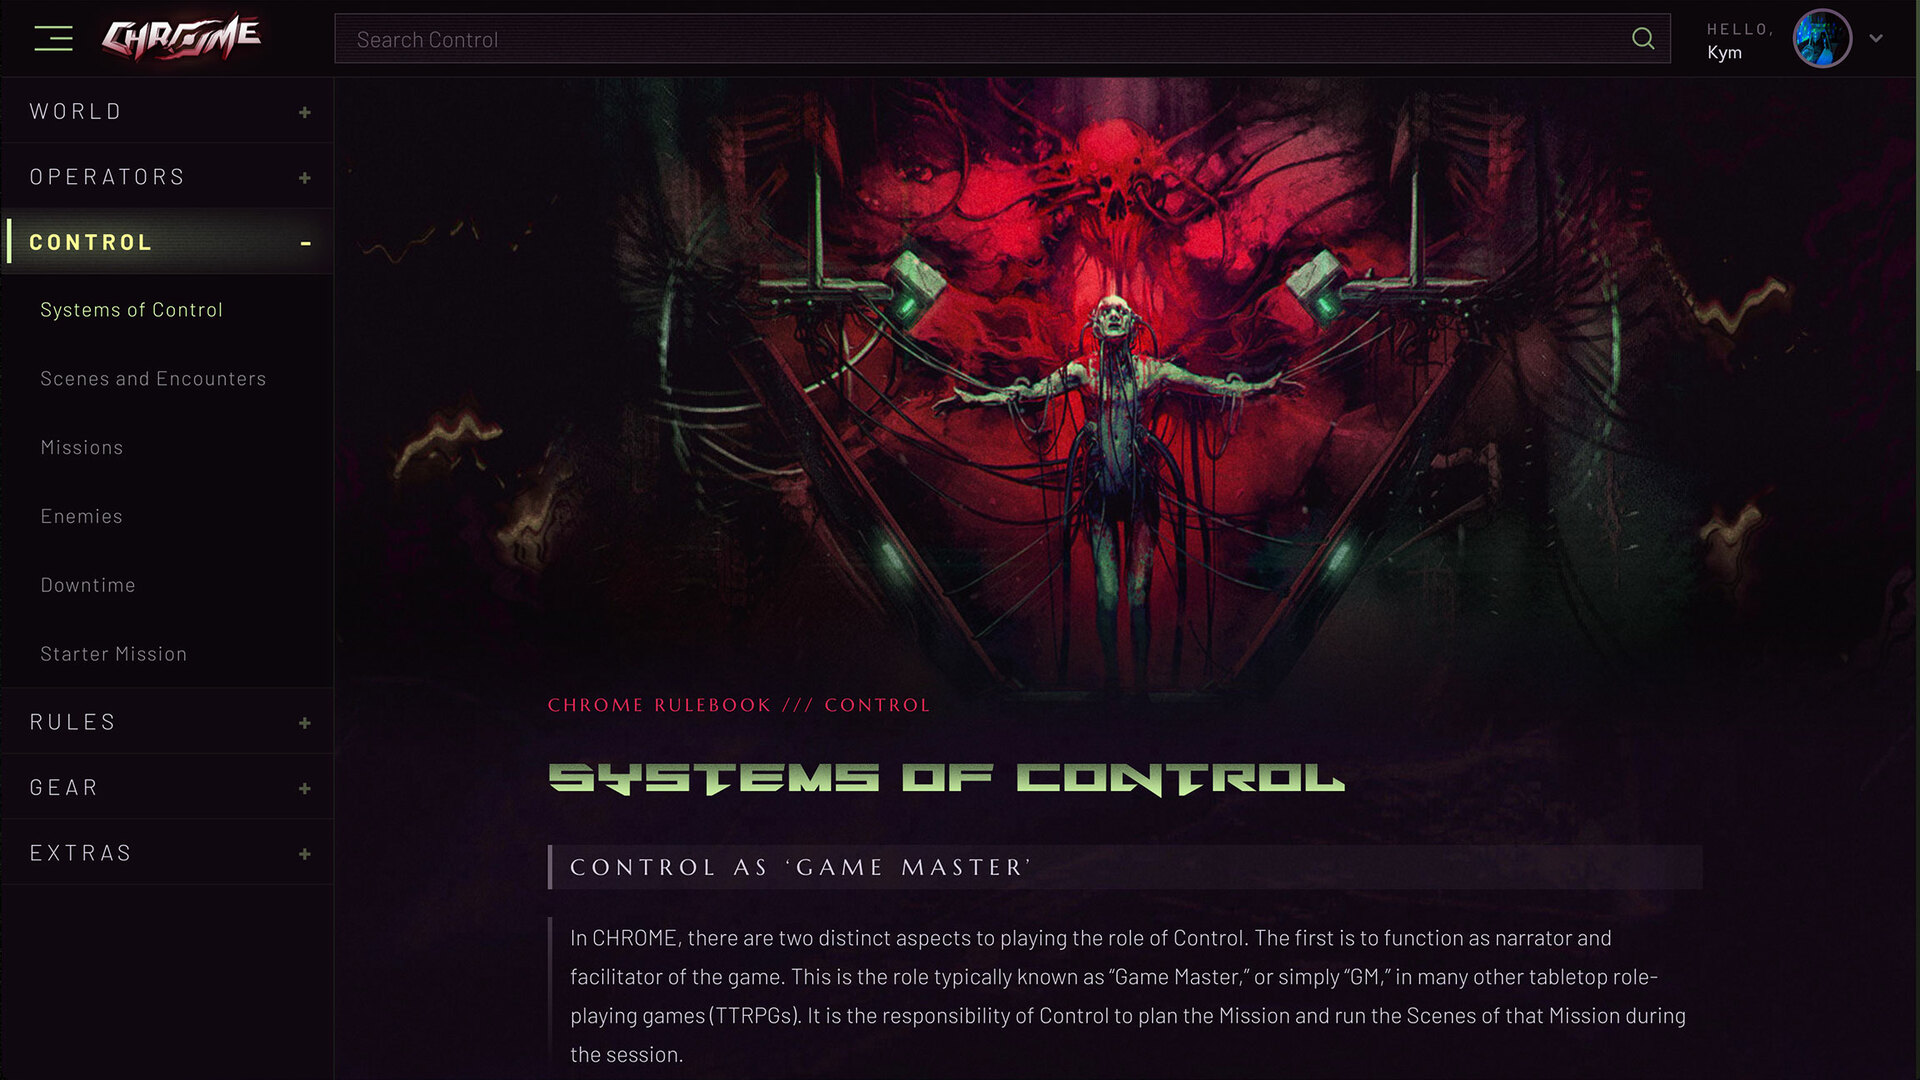 3 Systems of Control